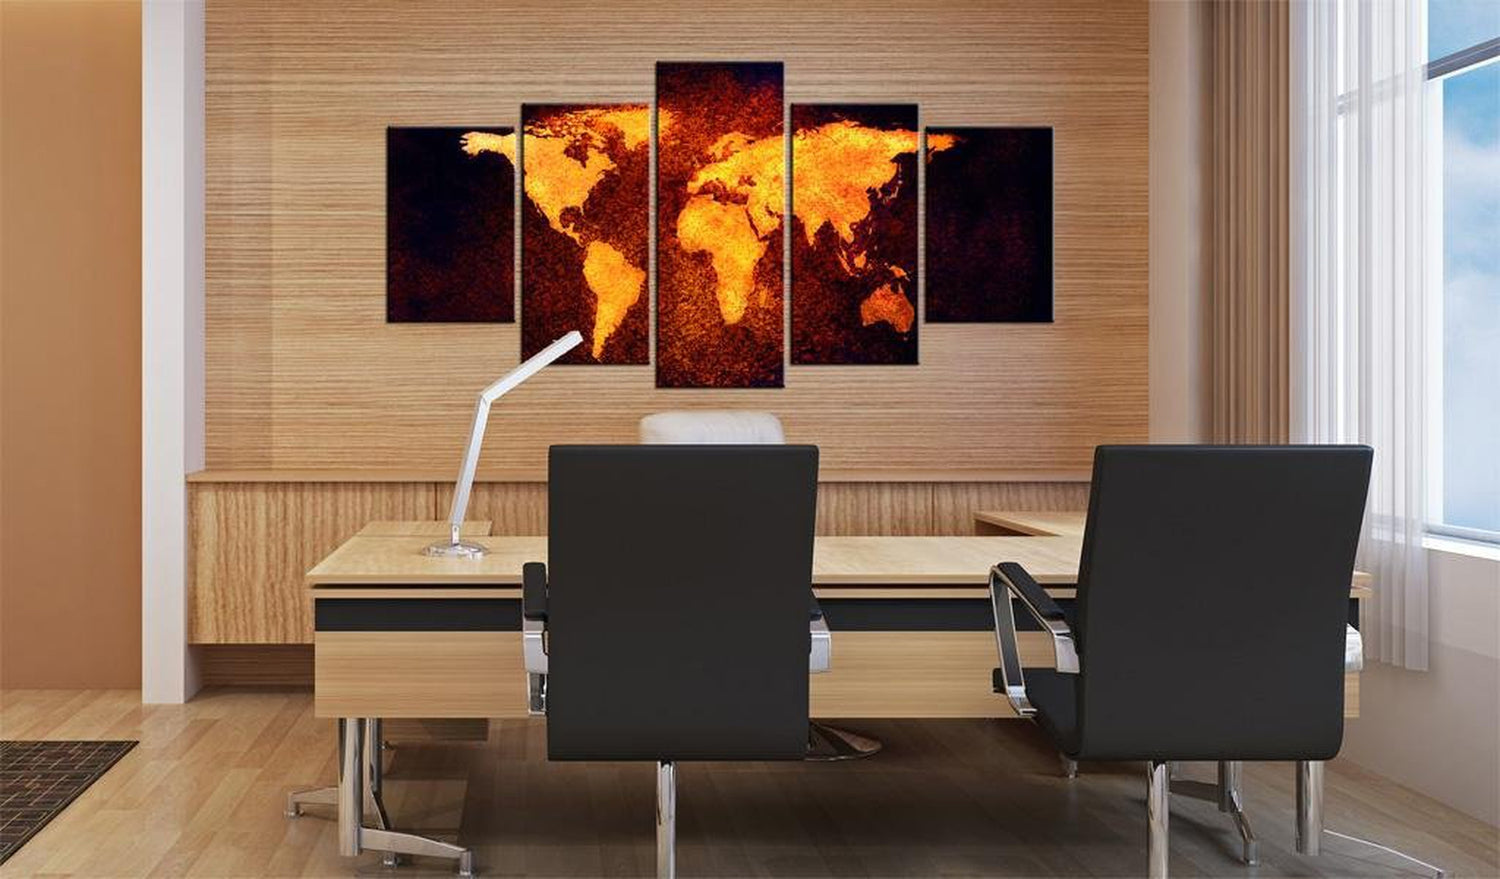 Stretched Canvas World Map Art - Map Of The World - Hot Lava-Tiptophomedecor